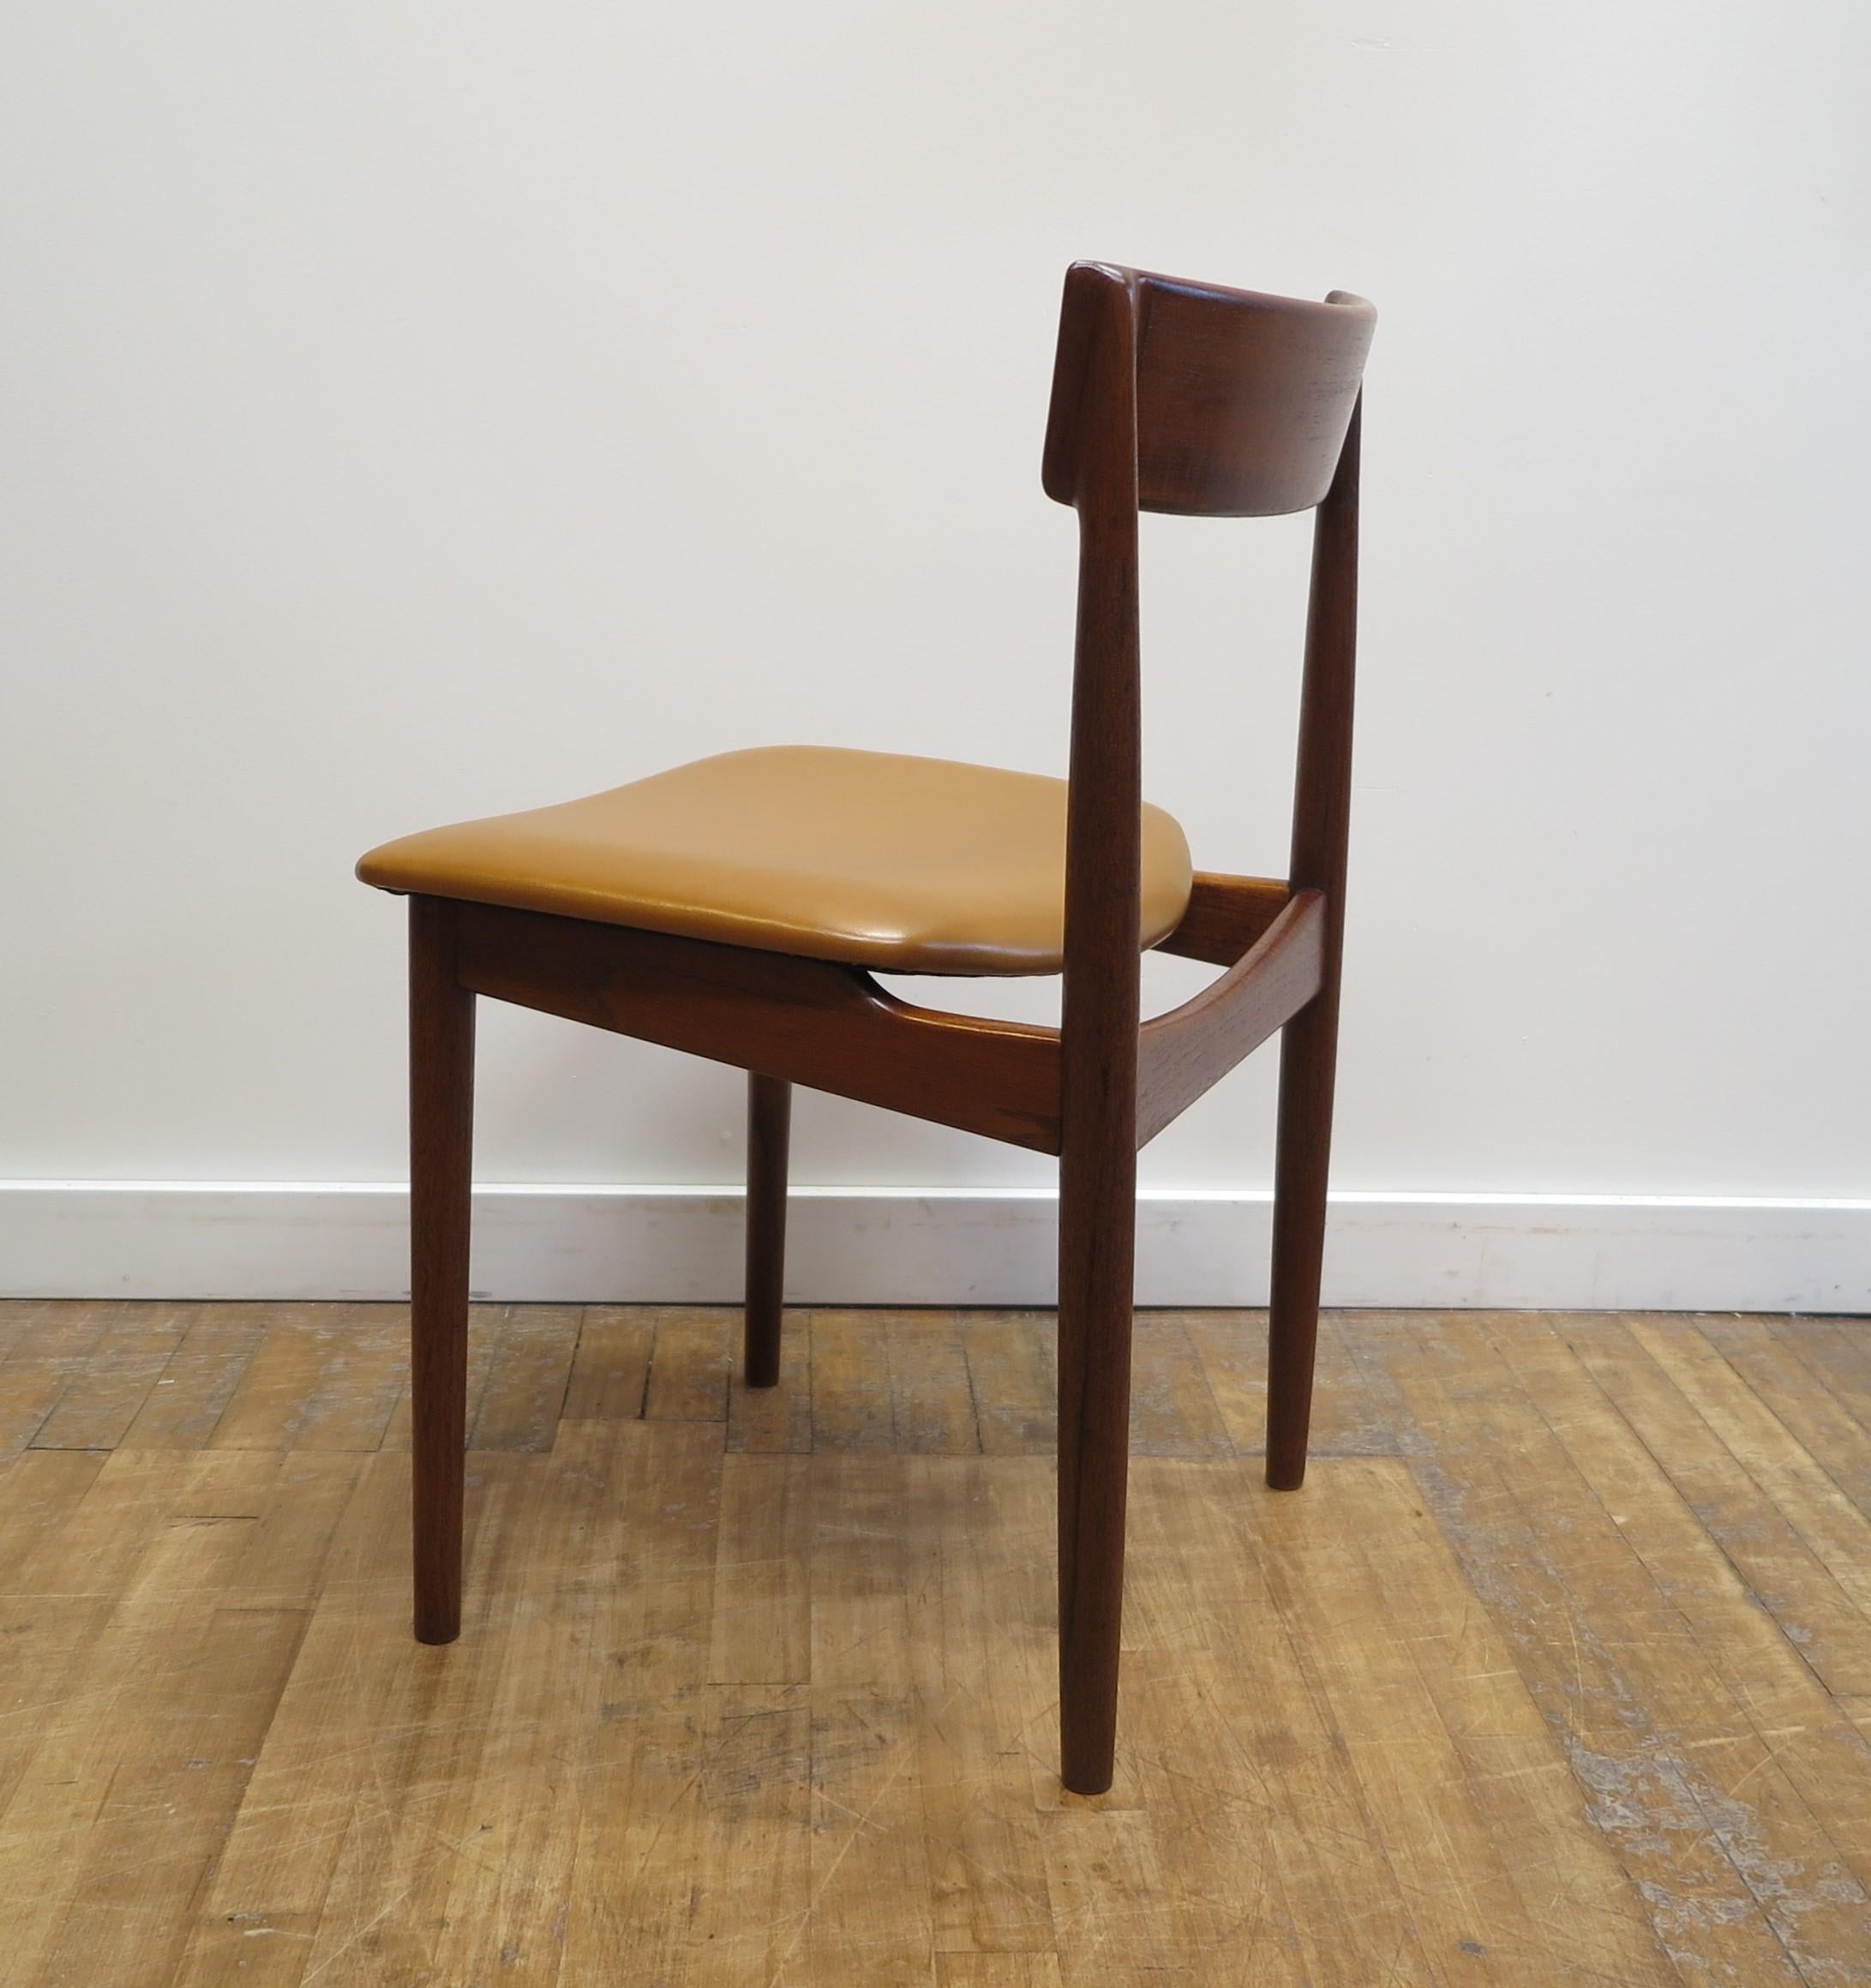 Occasional chair model 39, designed by Henry Rosengren Hansen  manufactured by Brande Moebelindustri 1960s.   Beautifully constructed of Rosewood with a Naugahyde leather seat.  In very good condition.  Danish oil finish with new seat covering.   A